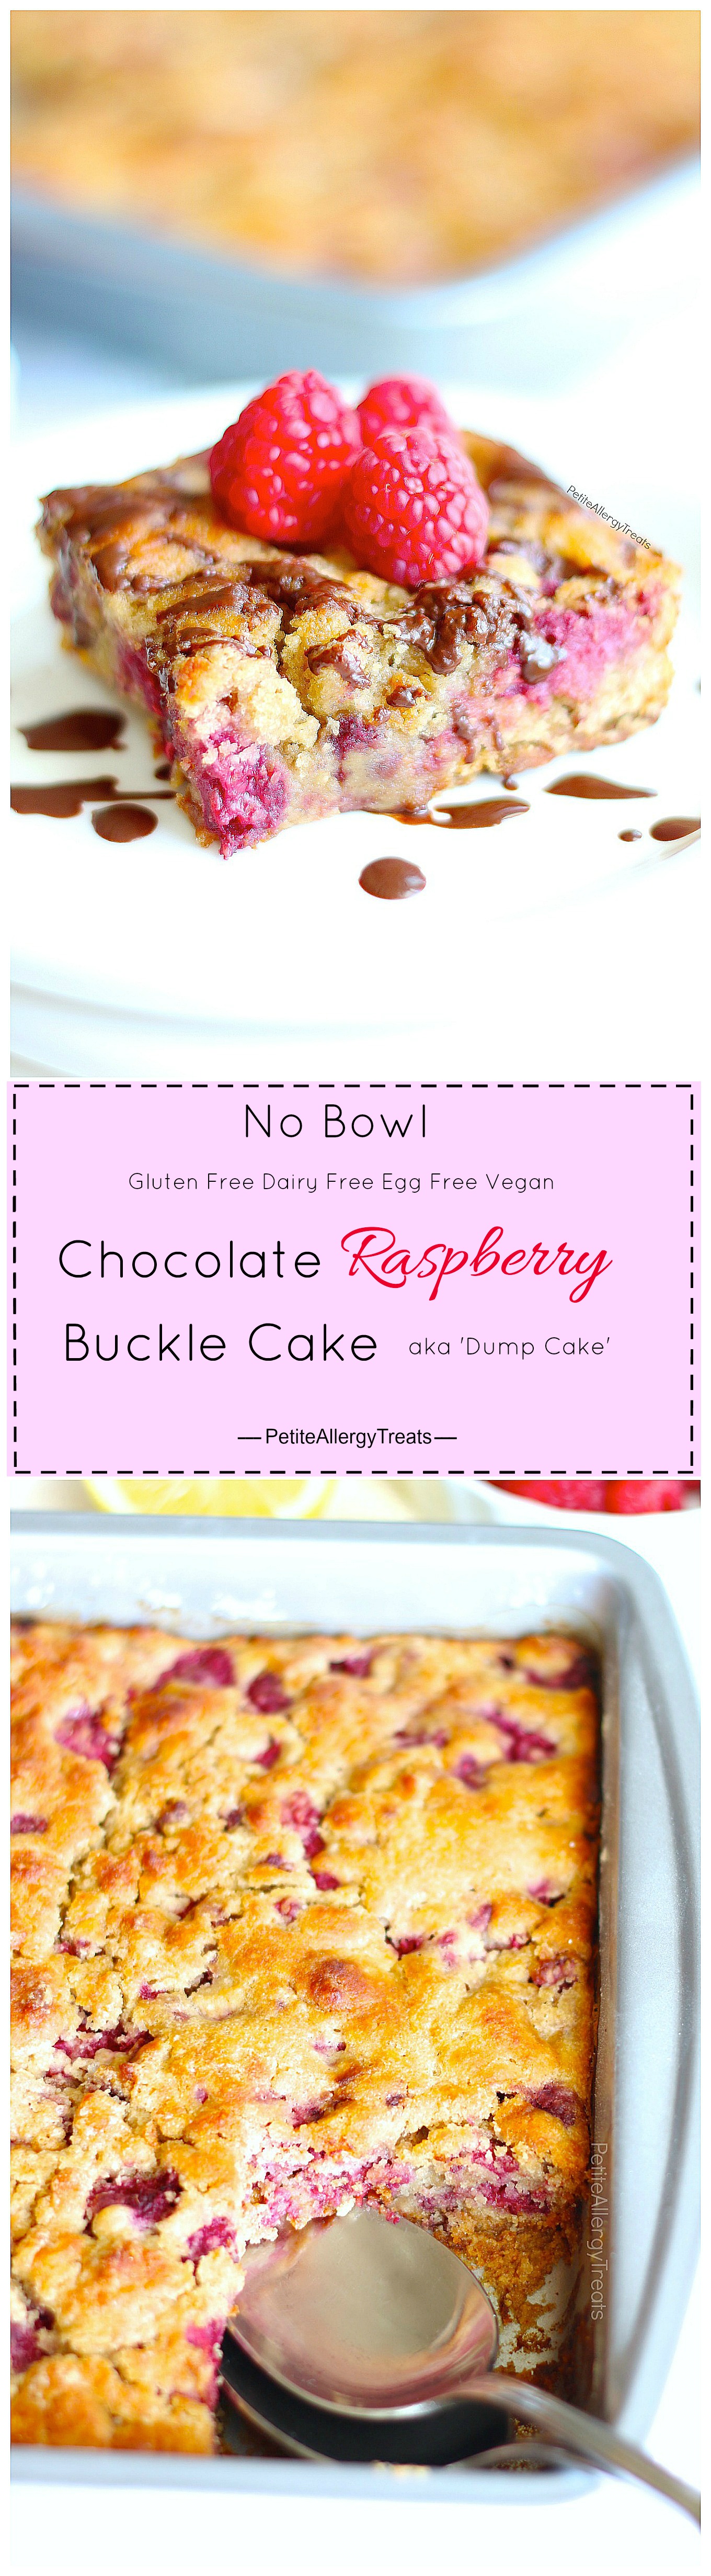 Gluten Free Raspberry Buckle Dump Cake (dairy free vegan) Recipe- Healthier no bowl breakfast cake containing real fruit, protein and food allergy friendly.